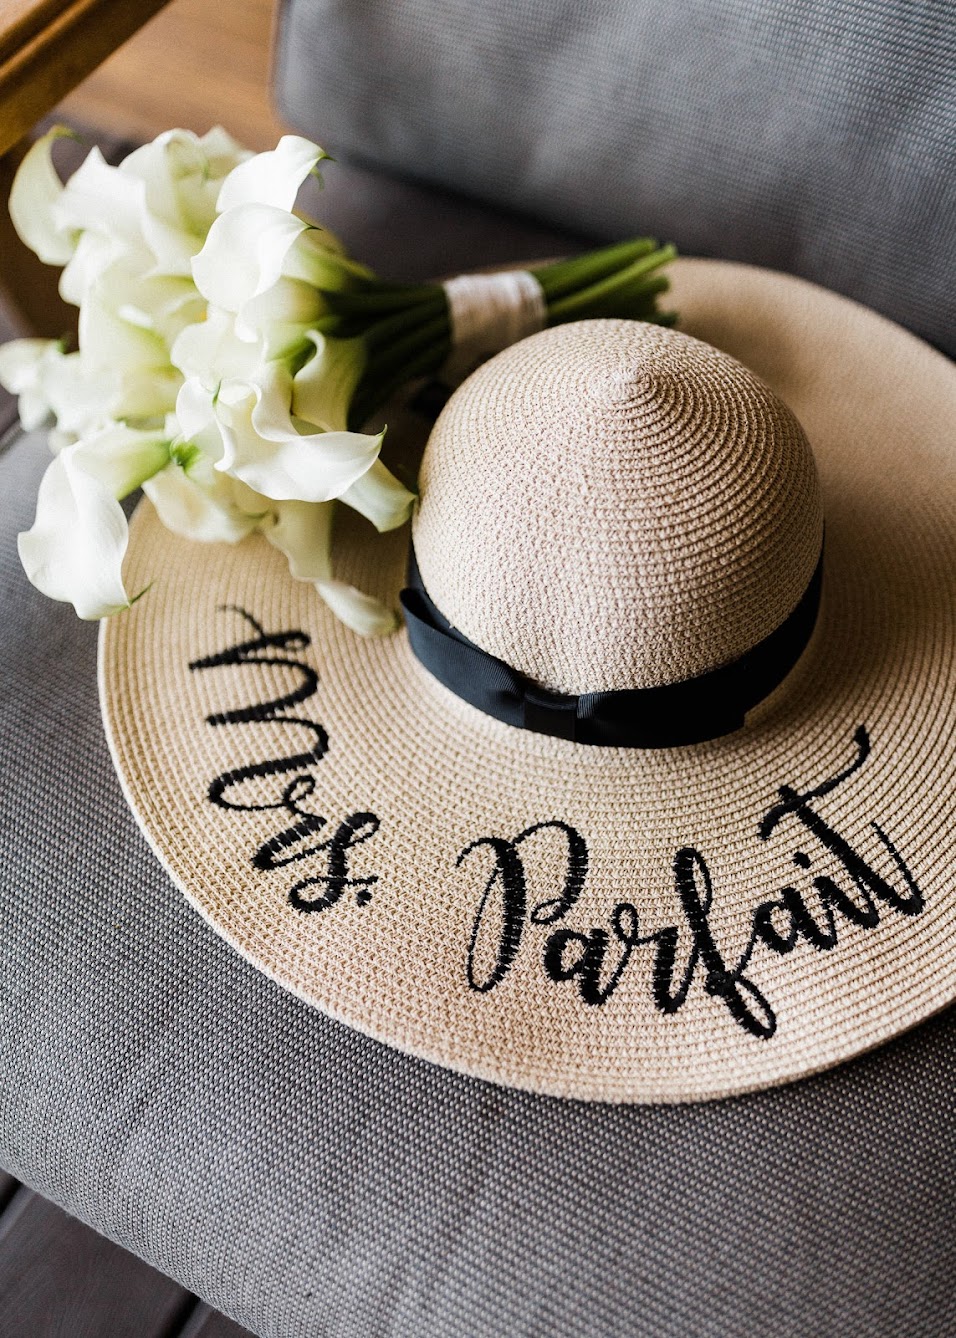 white floral bouquet, laying on a sun hat that says "Mrs. Parfait"